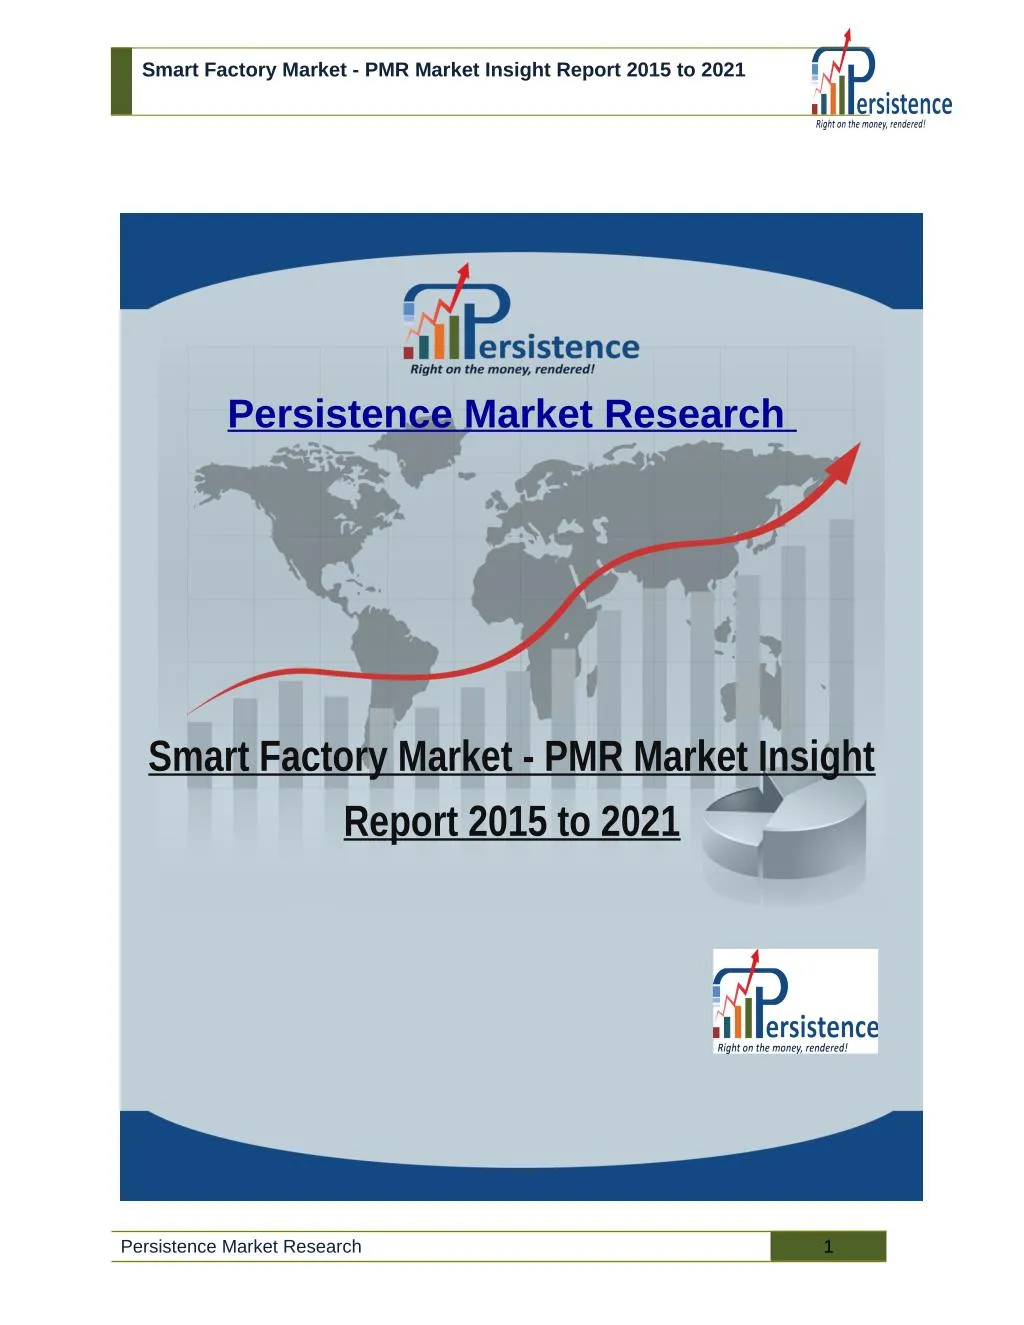 PPT - Smart Factory Market - PMR Market Insight Report 2015 to 2021 ...